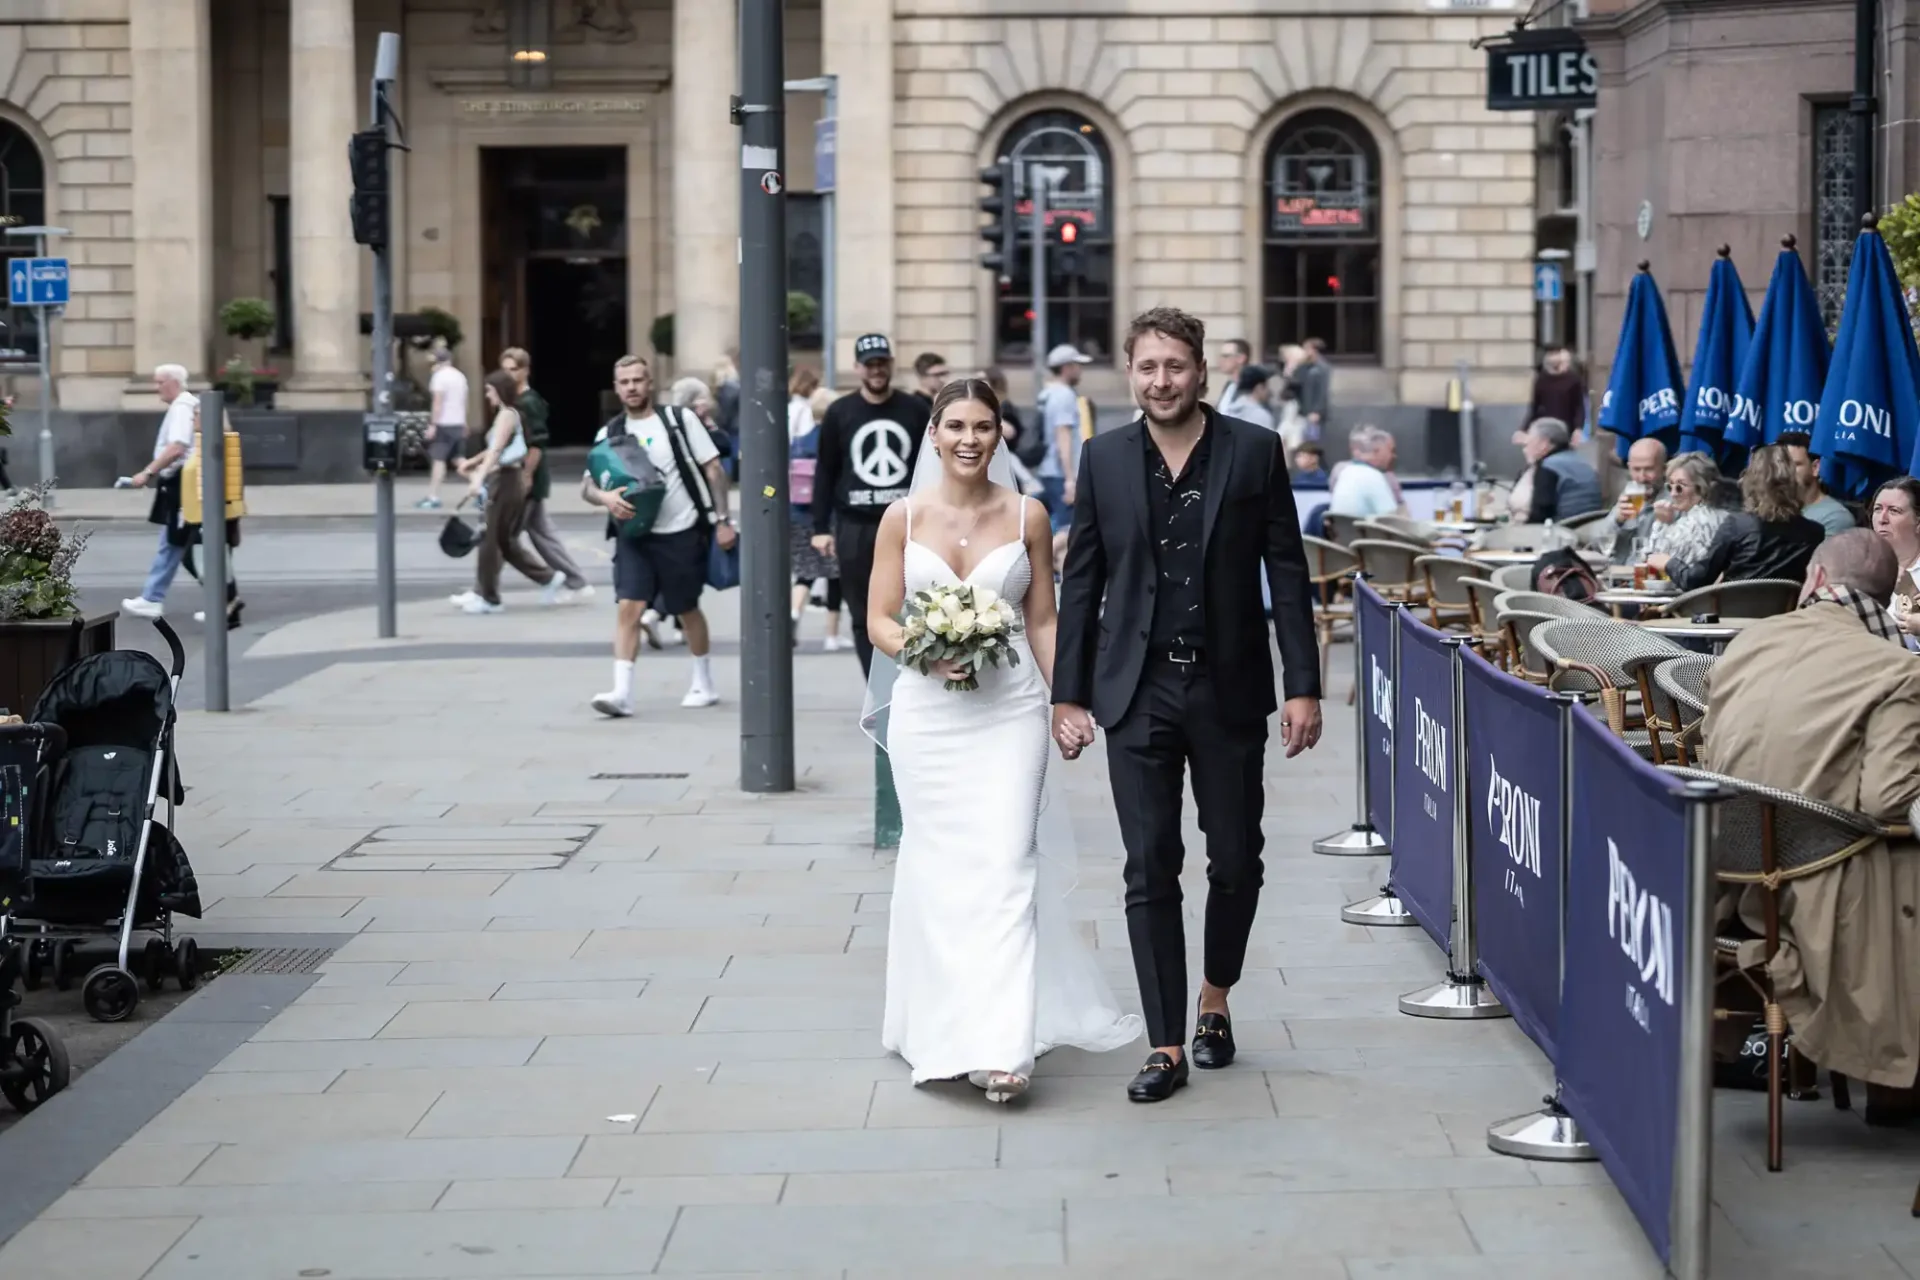 A newlywed couple walks hand in hand through a busy city street, the bride in a white dress with a bouquet, and the groom in a black suit.